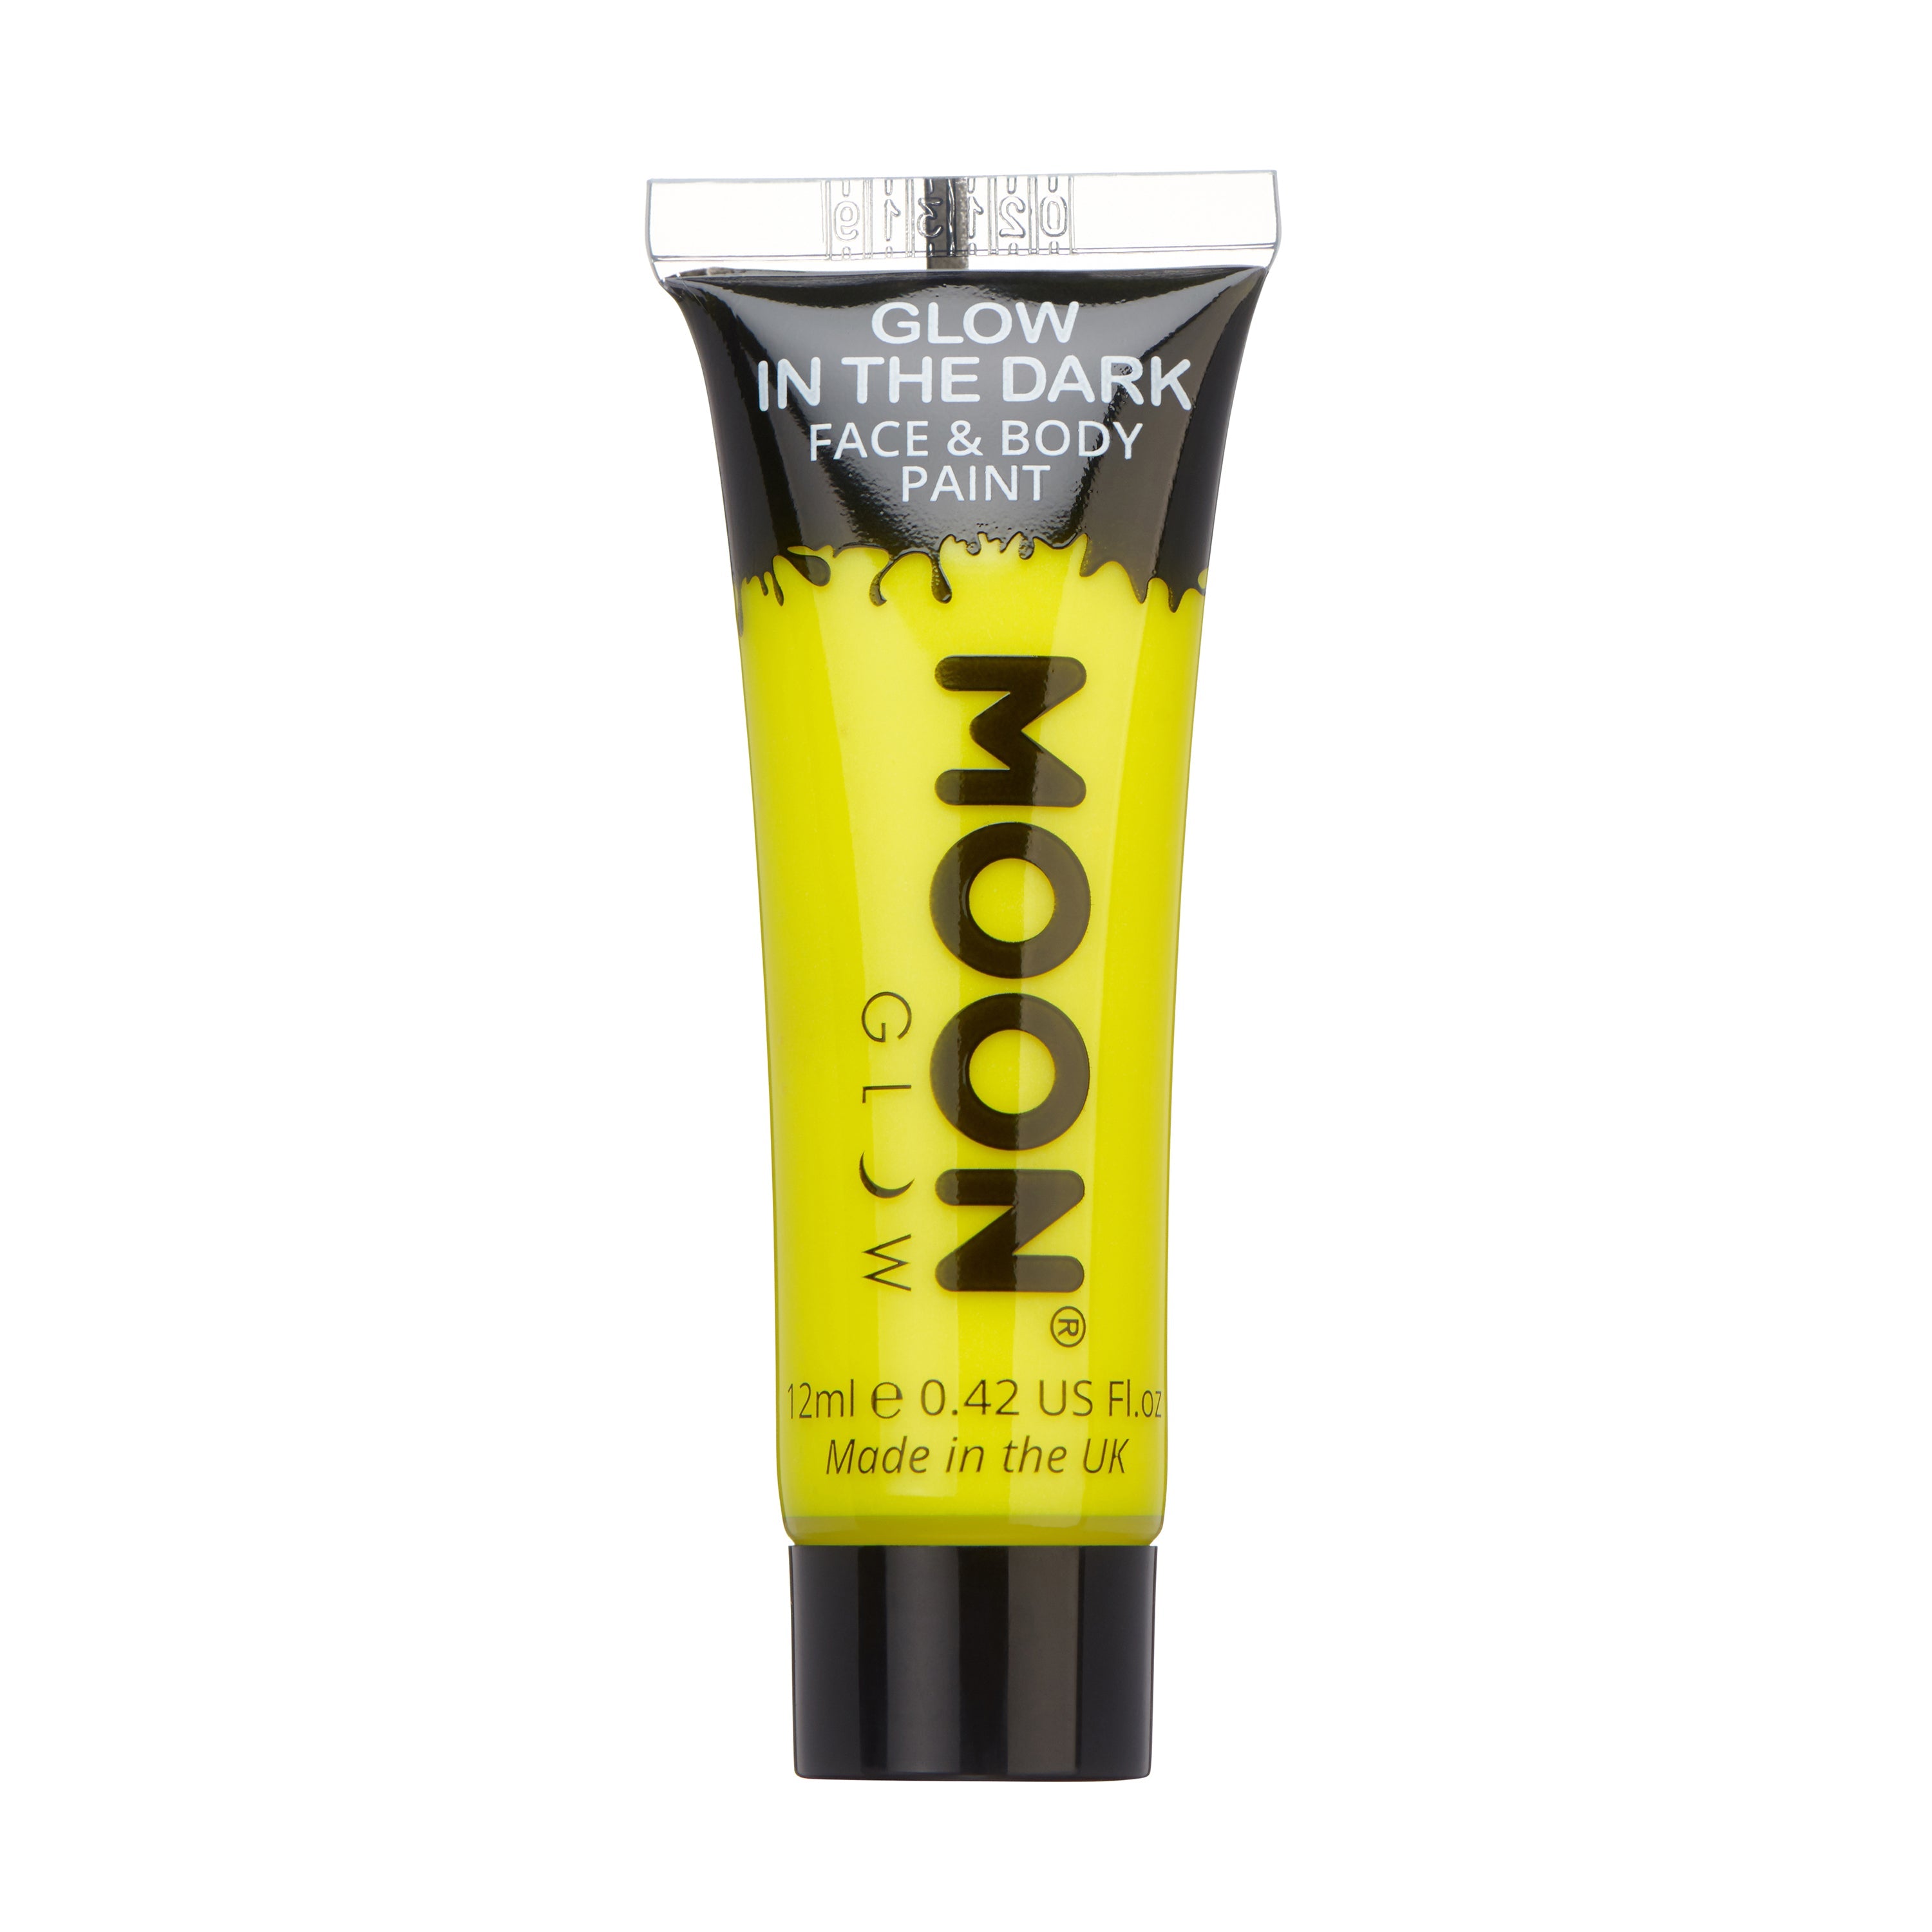 Yellow - Glow Face & Body Paint Makeup, 12mL. Cosmetically certified, FDA & Health Canada compliant, cruelty free and vegan.